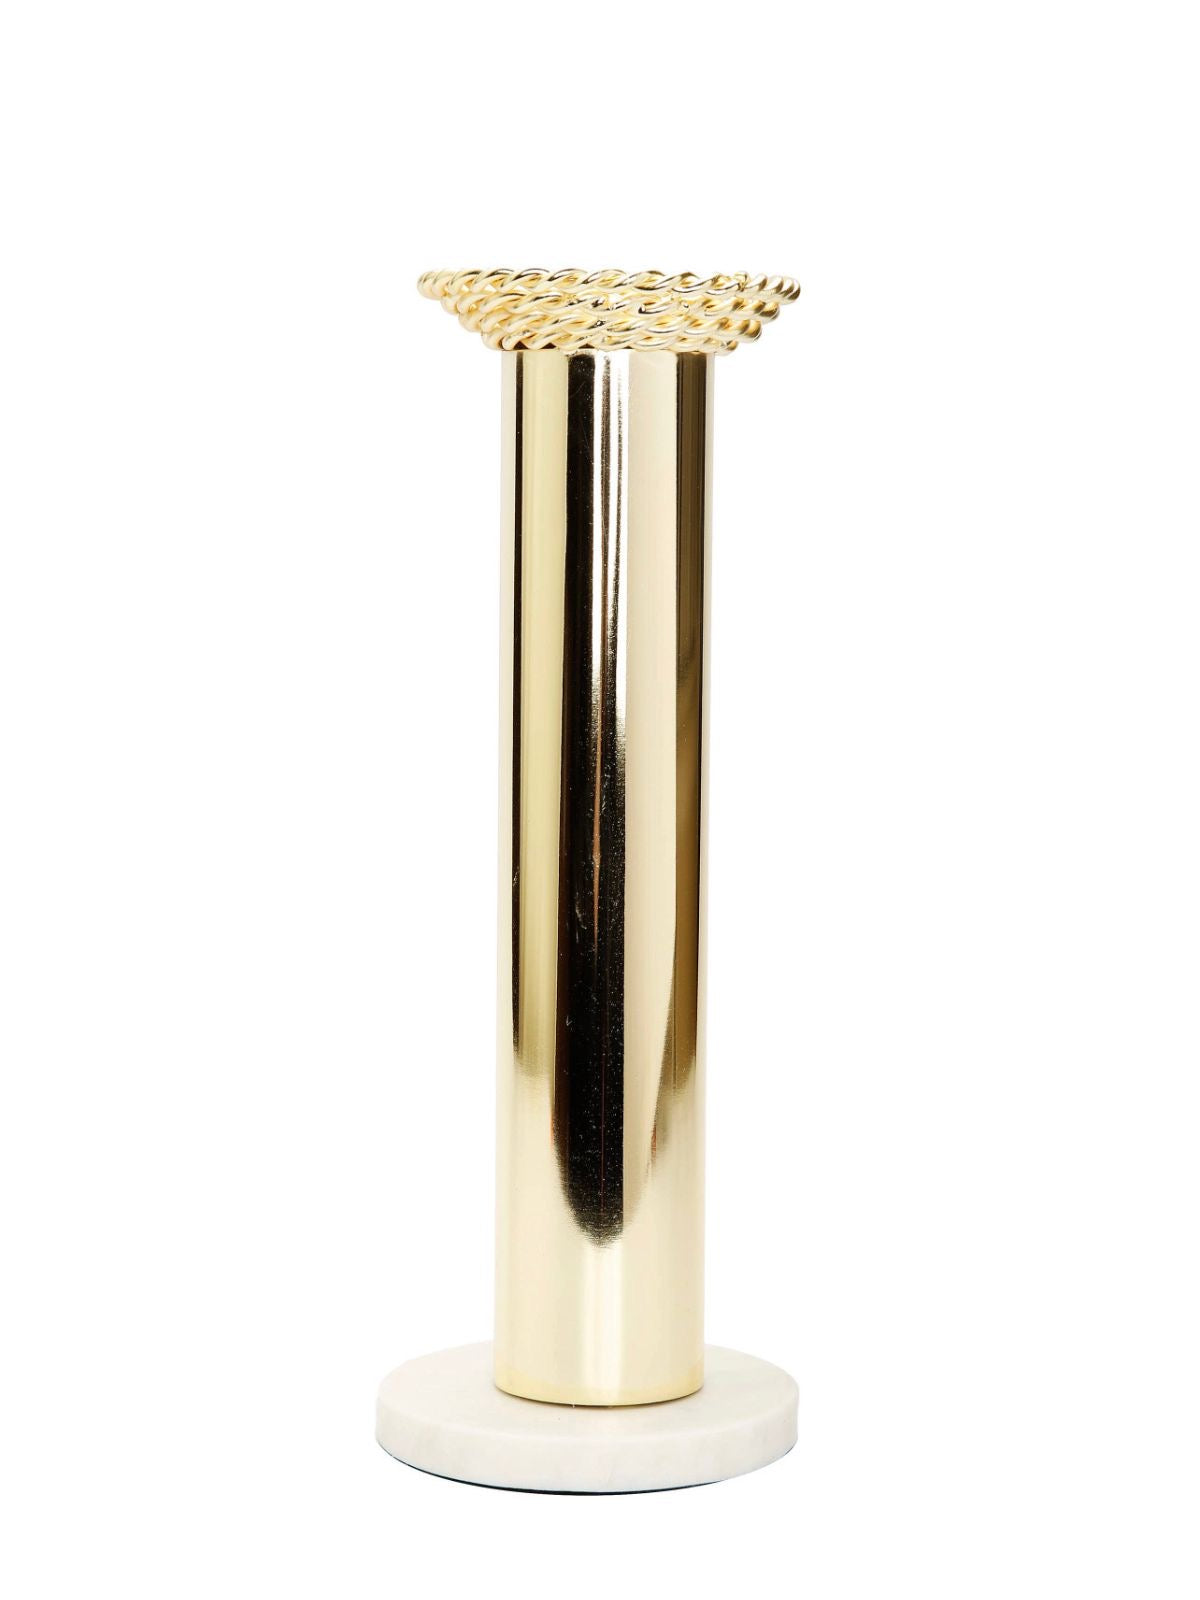 12.5H Candle Holder With Gold Metal Rope Design on Marble Base. Sold by KYA Home Decor.